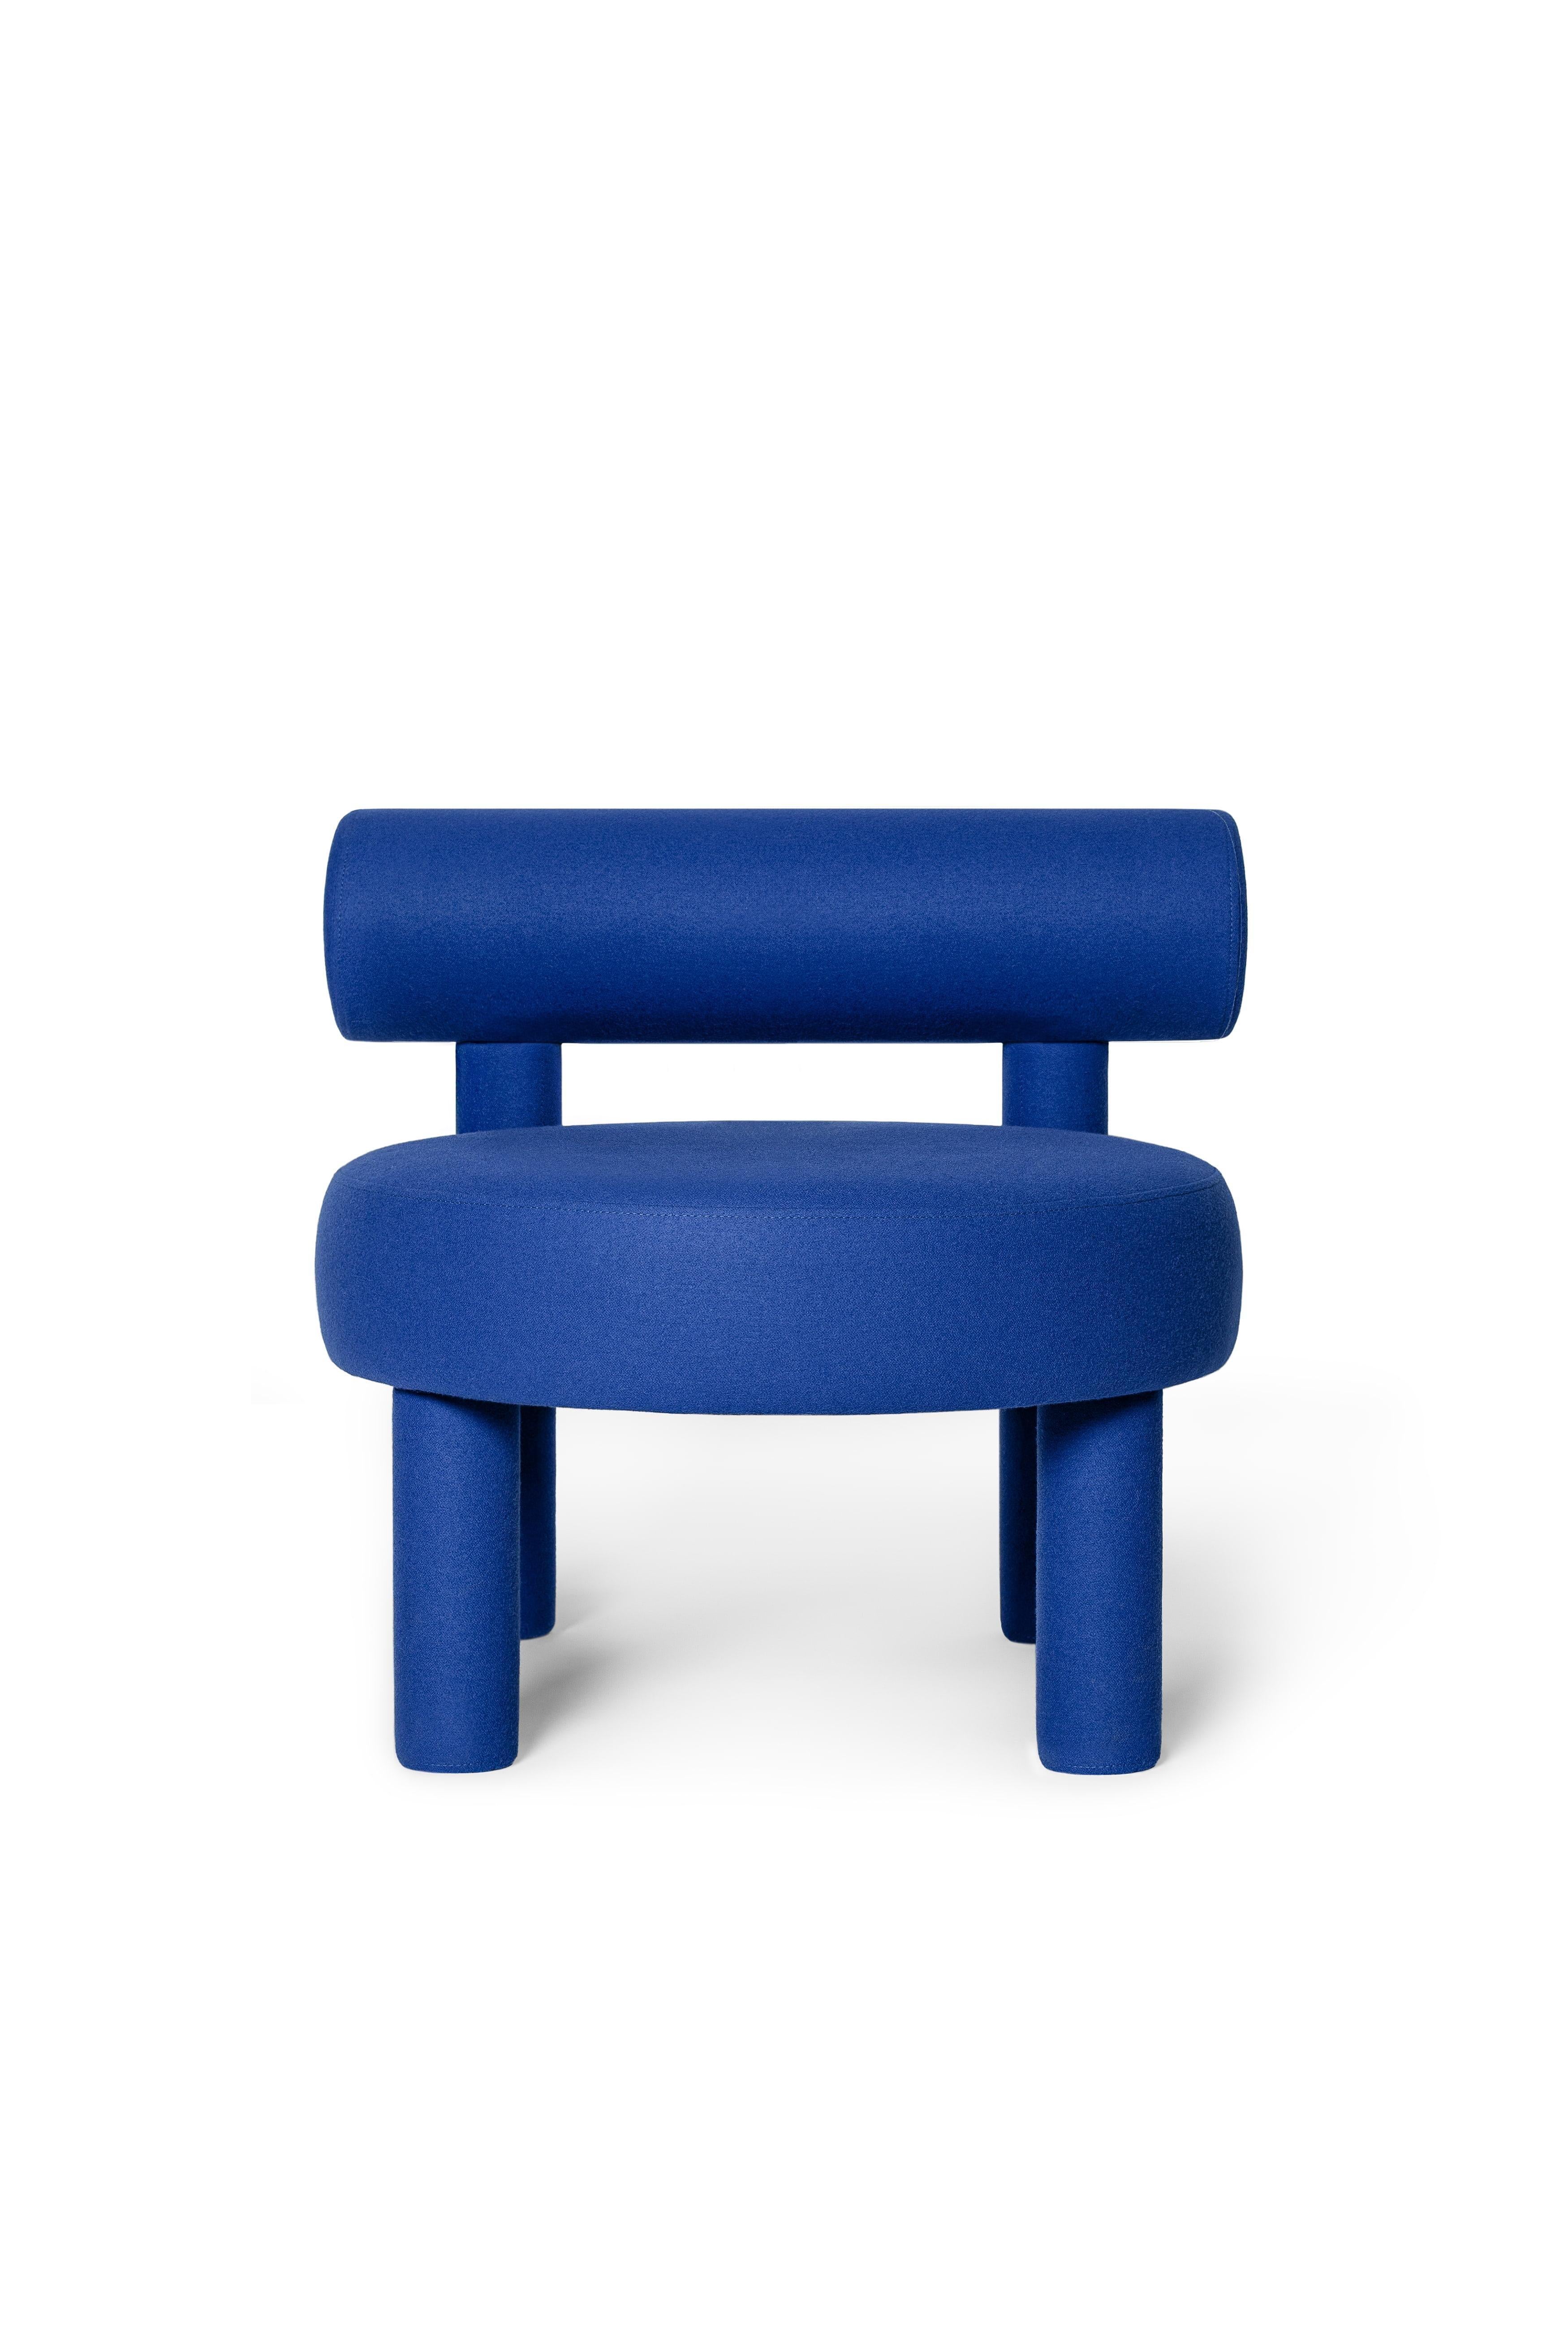 Contemporary Set 'Gropius CS1' by NOOM, 2 Low Chair in Wool Blue For Sale 5